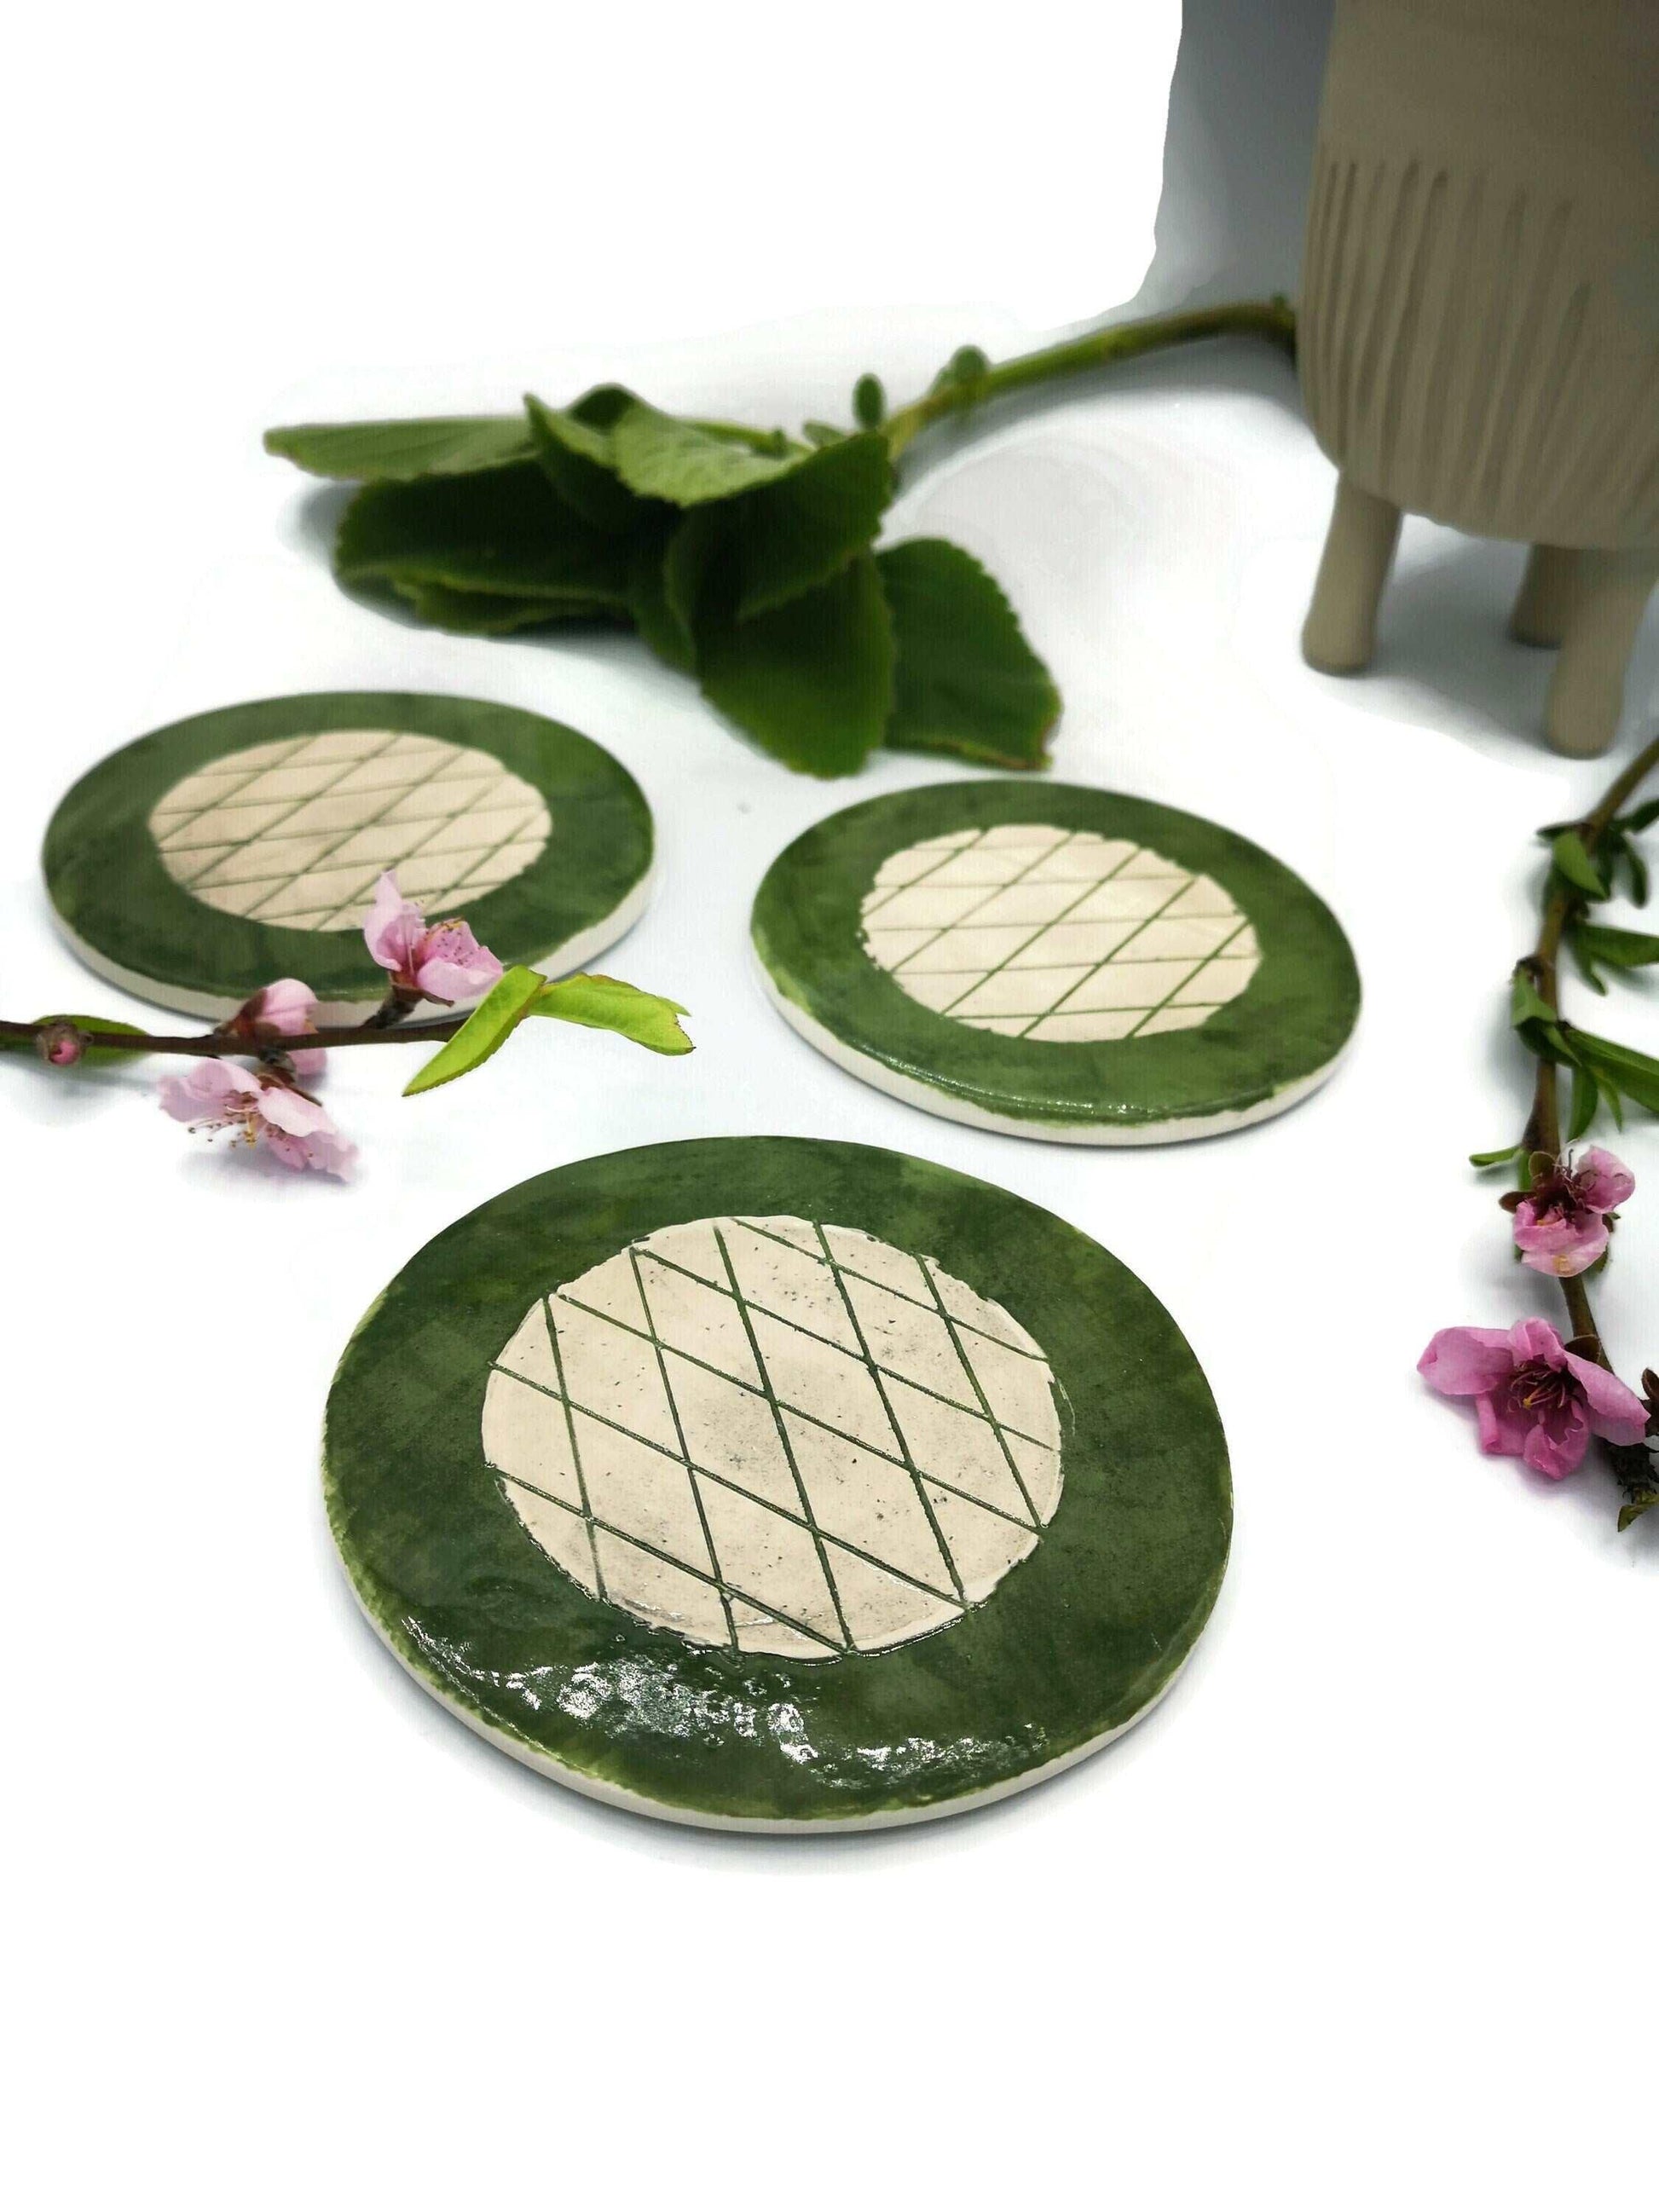 1Pc Handmade Ceramic Geometric Coaster For Drinks, Housewarming Gift First Home, Green Coasters Best Office Desk Accessories Gifts For Him